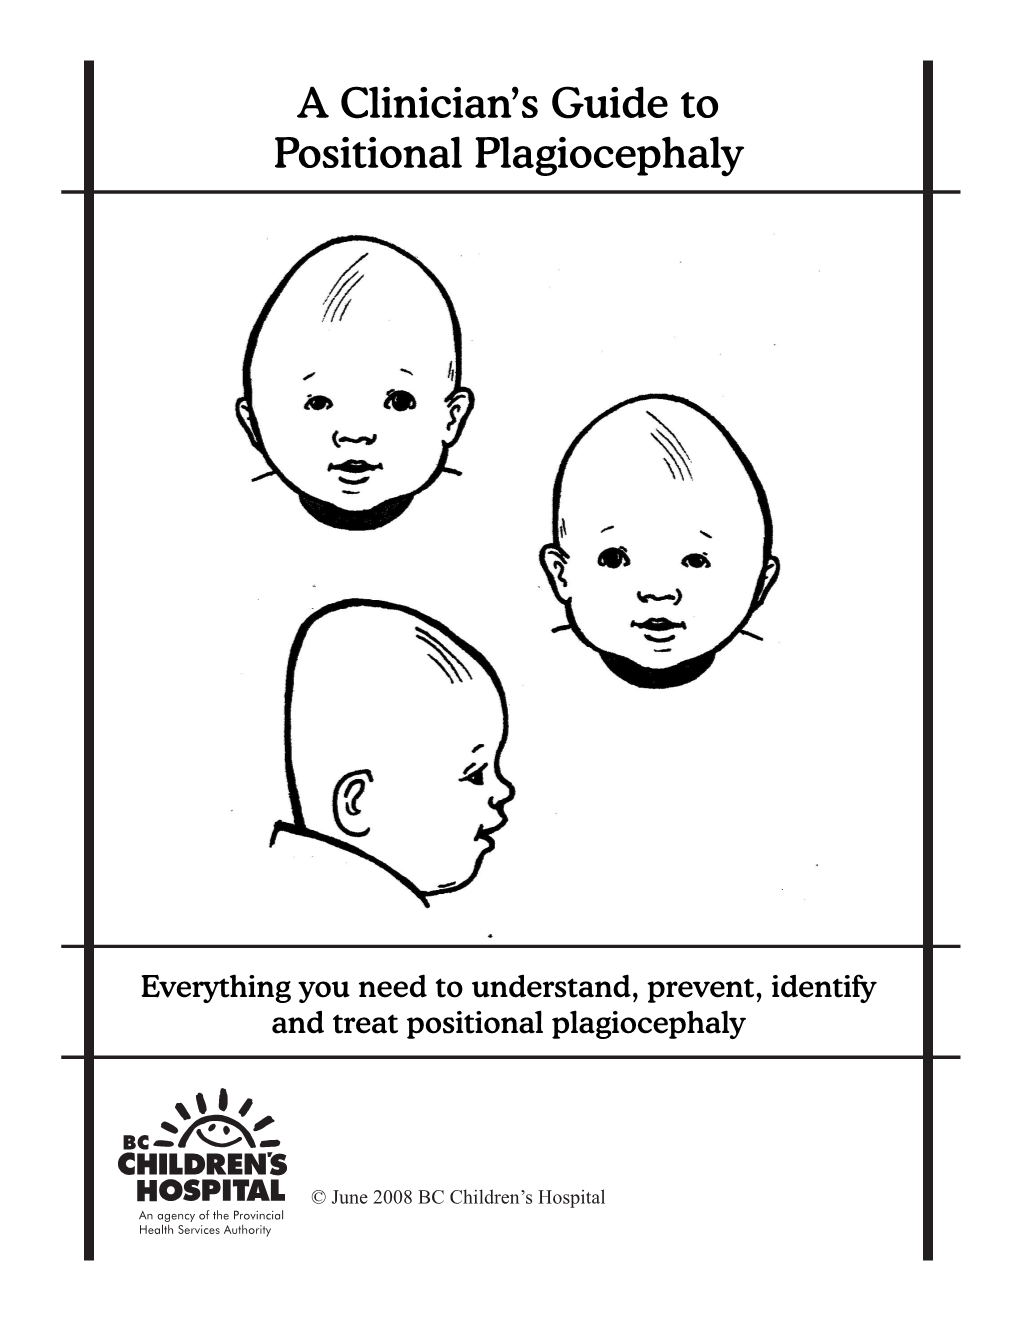 A Clinician's Guide to Positional Plagiocephaly